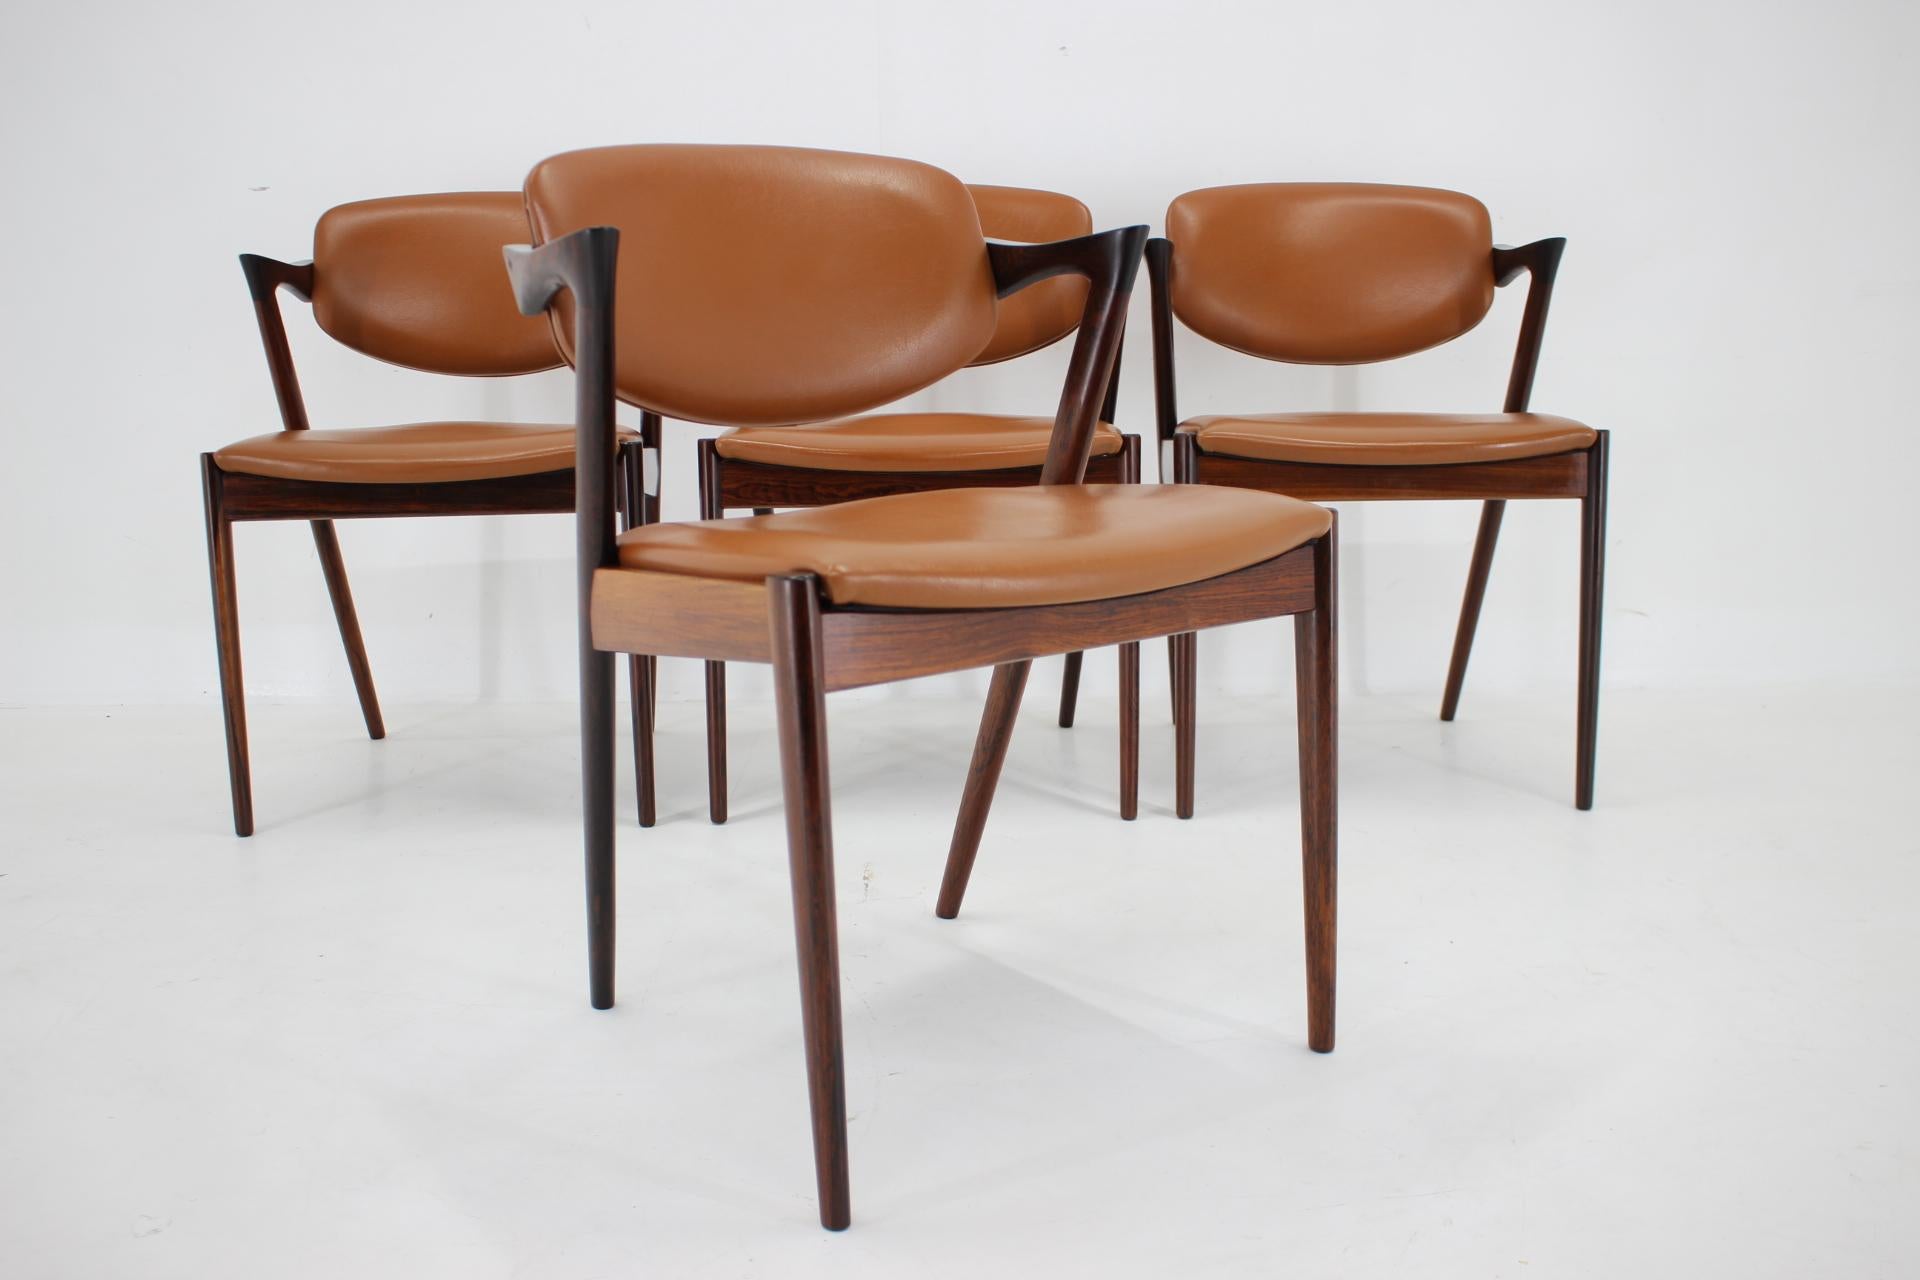 1960s Kai Kristiansen Model 42 Dining Chairs in Palisander, set of 4 For Sale 5